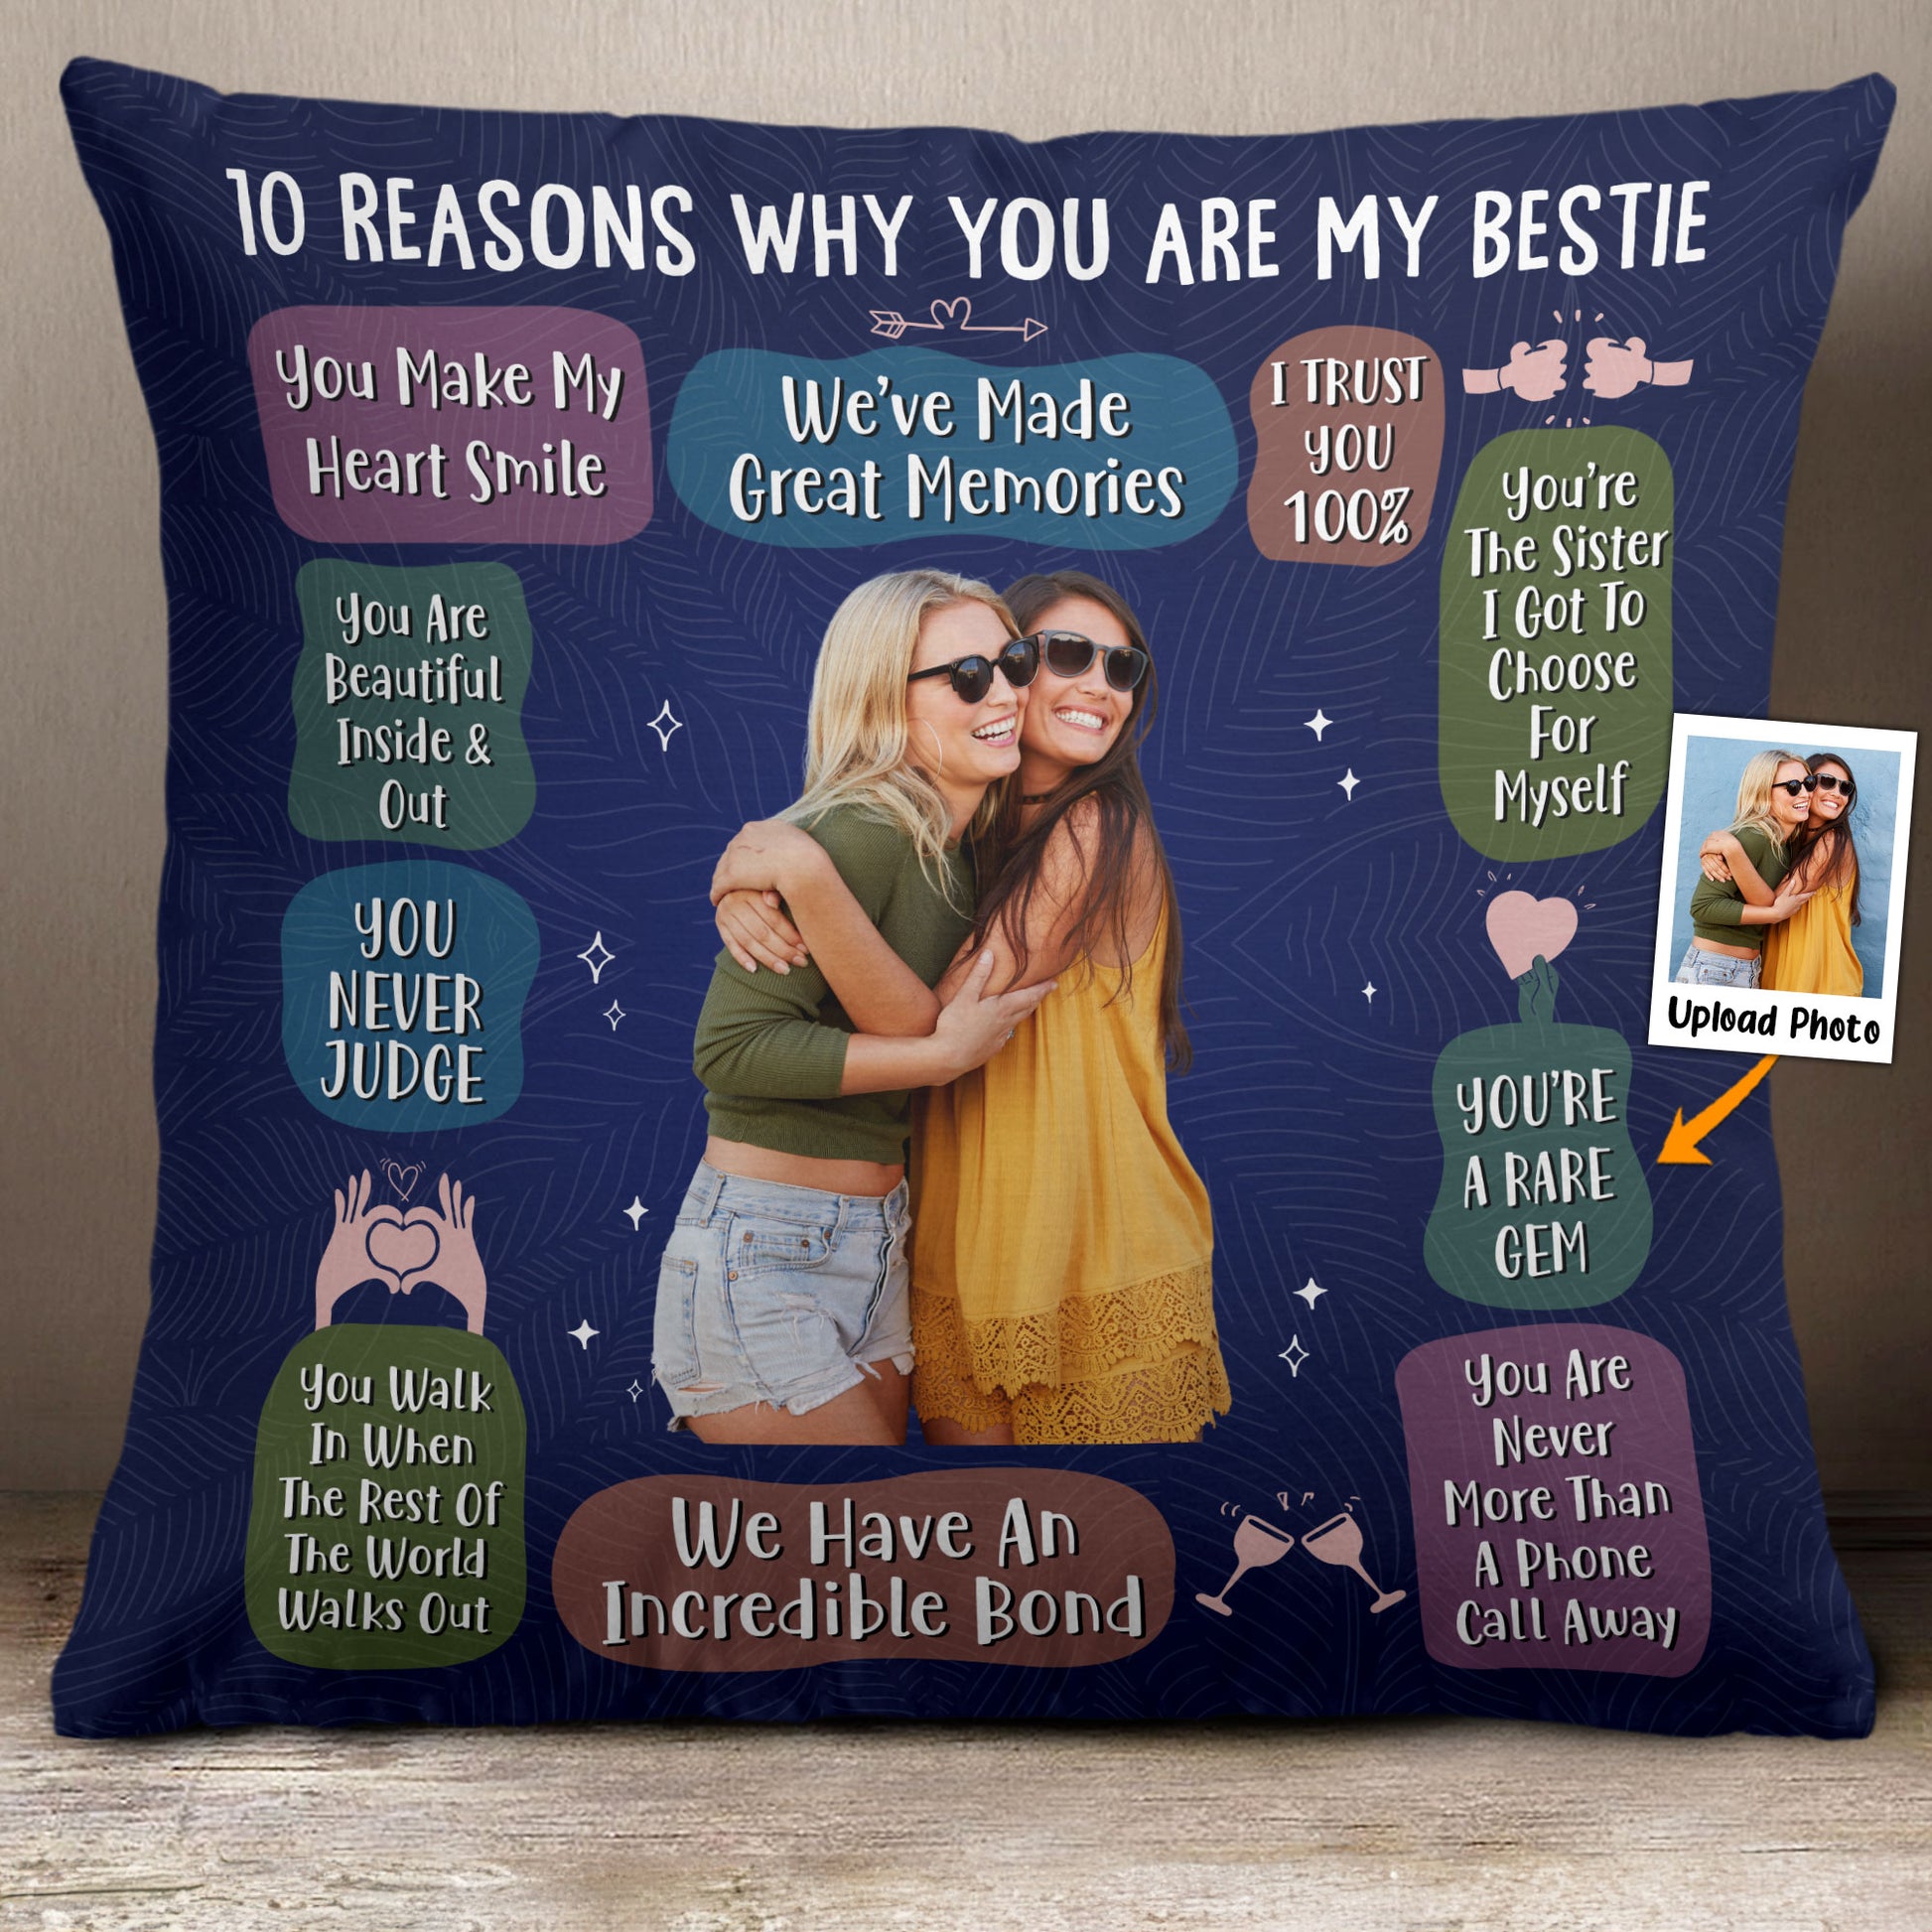 You Are Beautiful Victorious - Personalized Pillow (Insert